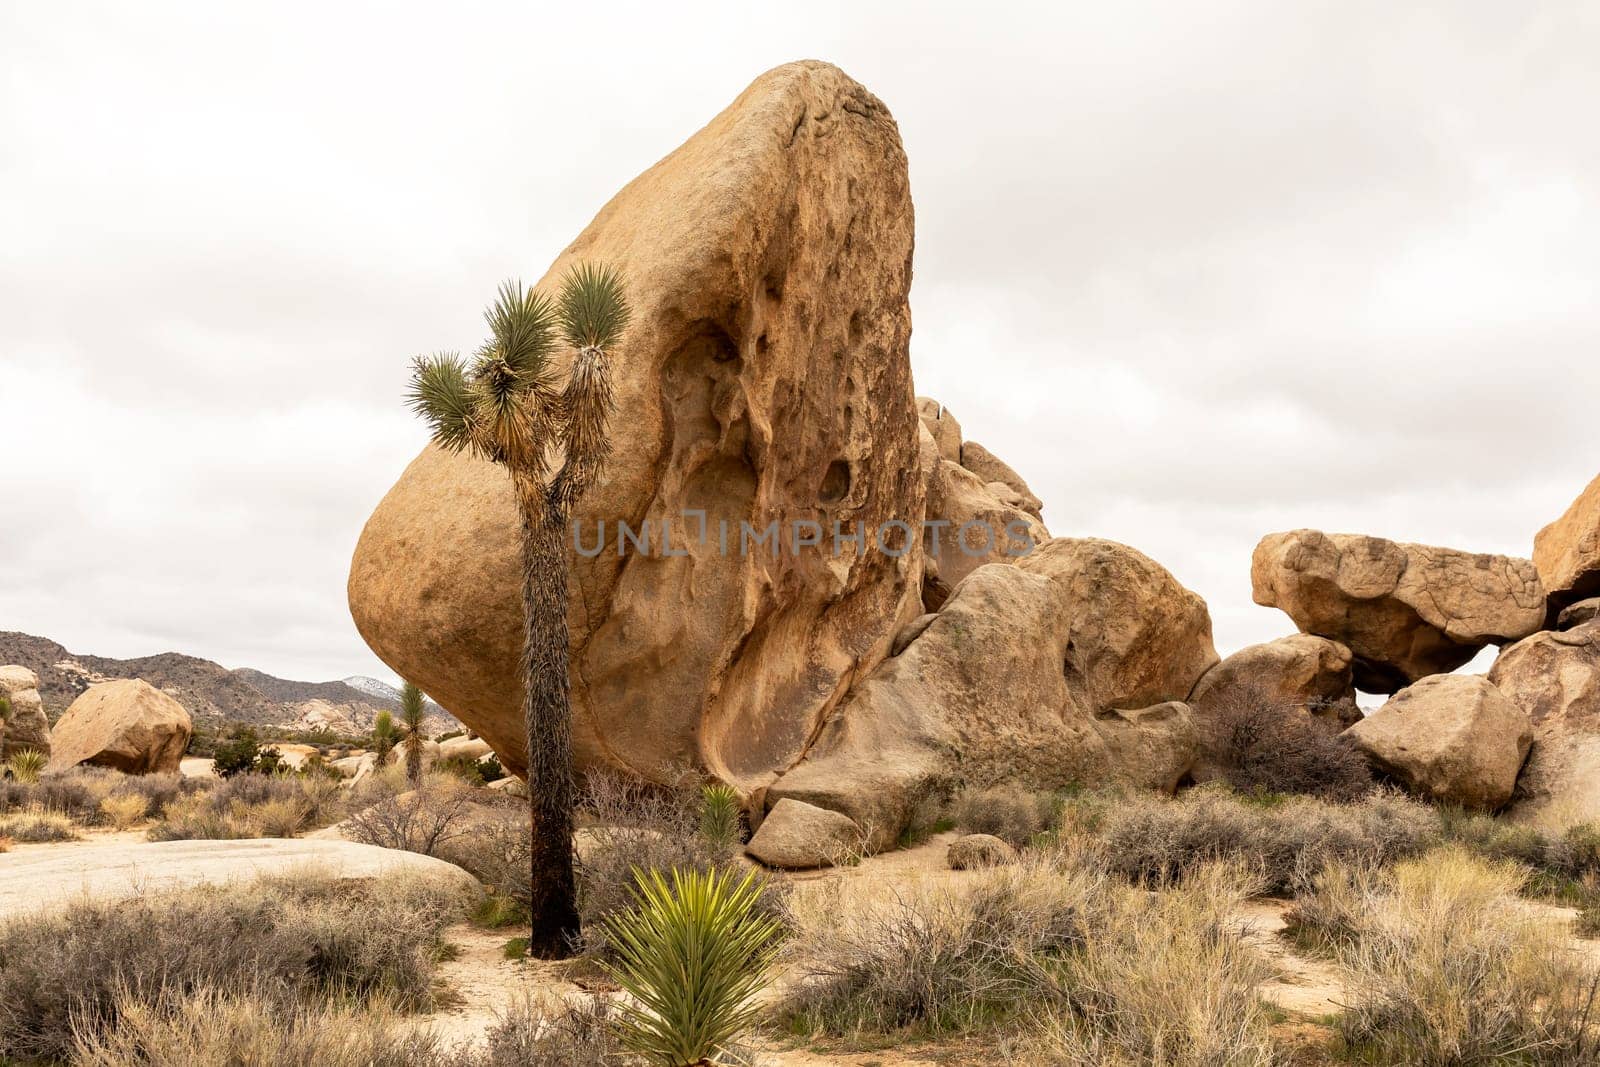 Big Rocks in Joshua Tree National Park. National Park In California. Desert Ecosystems The Mojave And The Colorado, Usa. Rock Formation. Gray Sky. Horizontal. Spring time. Yucca Brevifolia by netatsi